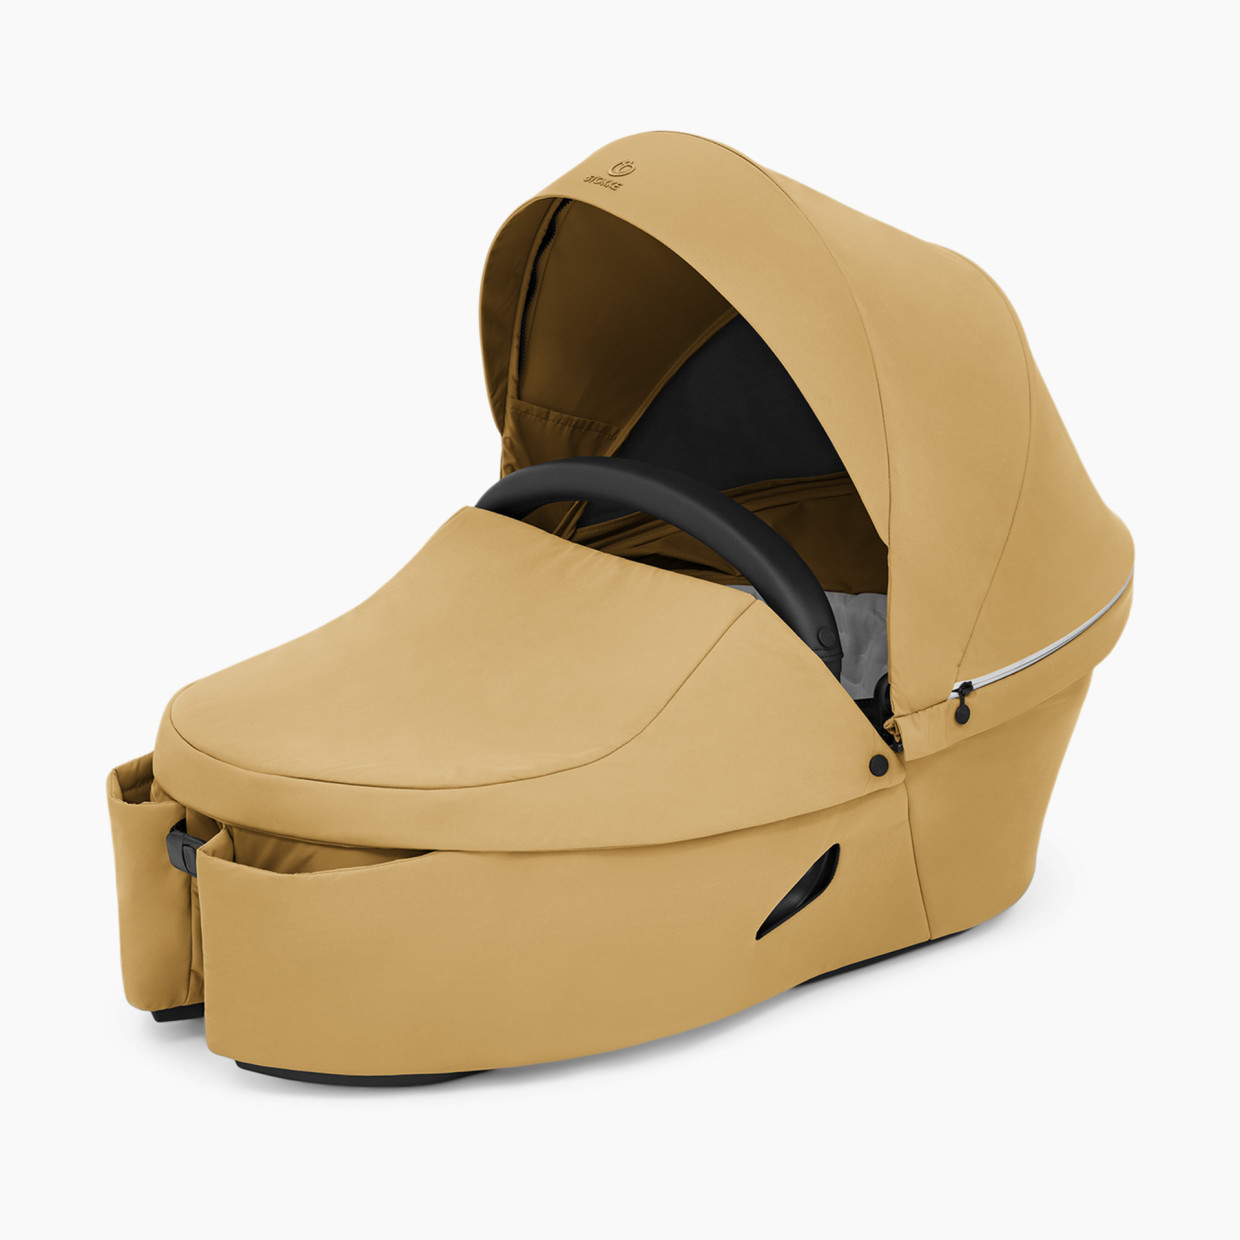 Stokke Xplory X Carry Cot - Golden Yellow.